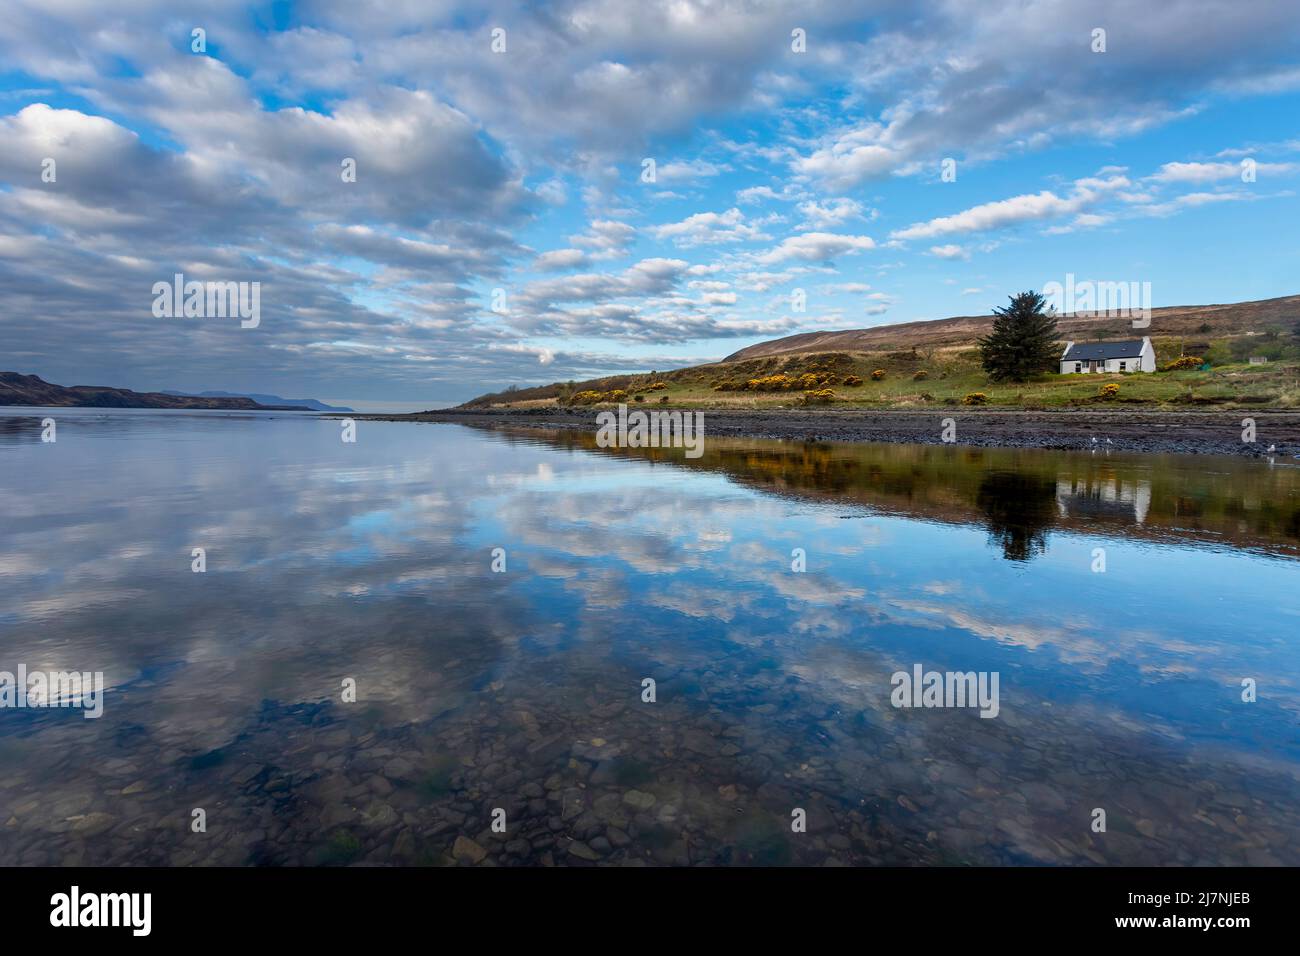 Editorial Scotland, UK - April 27, 2022: Dawn on the River Brittle as it flows into Loch Brittle on the Isle of Skye, Scotland, UK Stock Photo